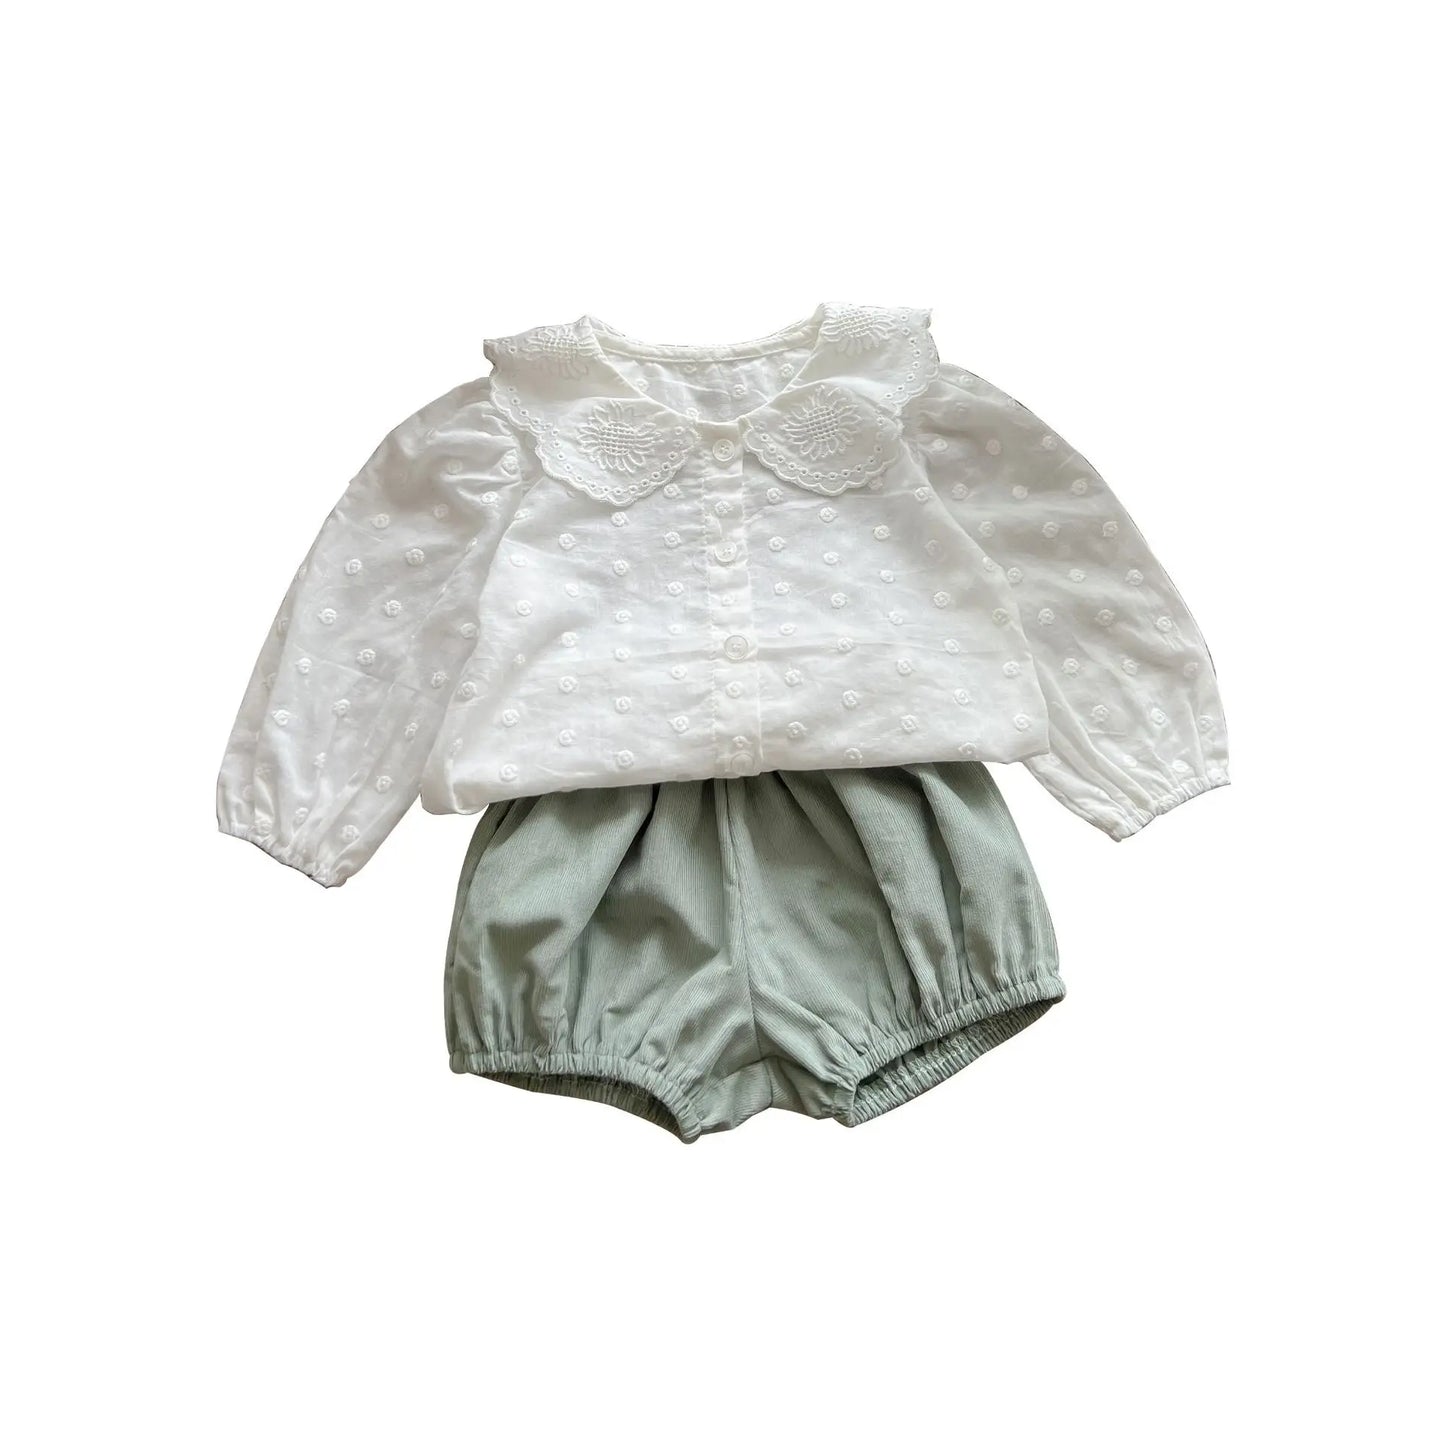 In the Park - Baby Girls Jacquard Long-Sleeved Tops + Bloomer Shorts(Diaper Covers) 100% Cotton